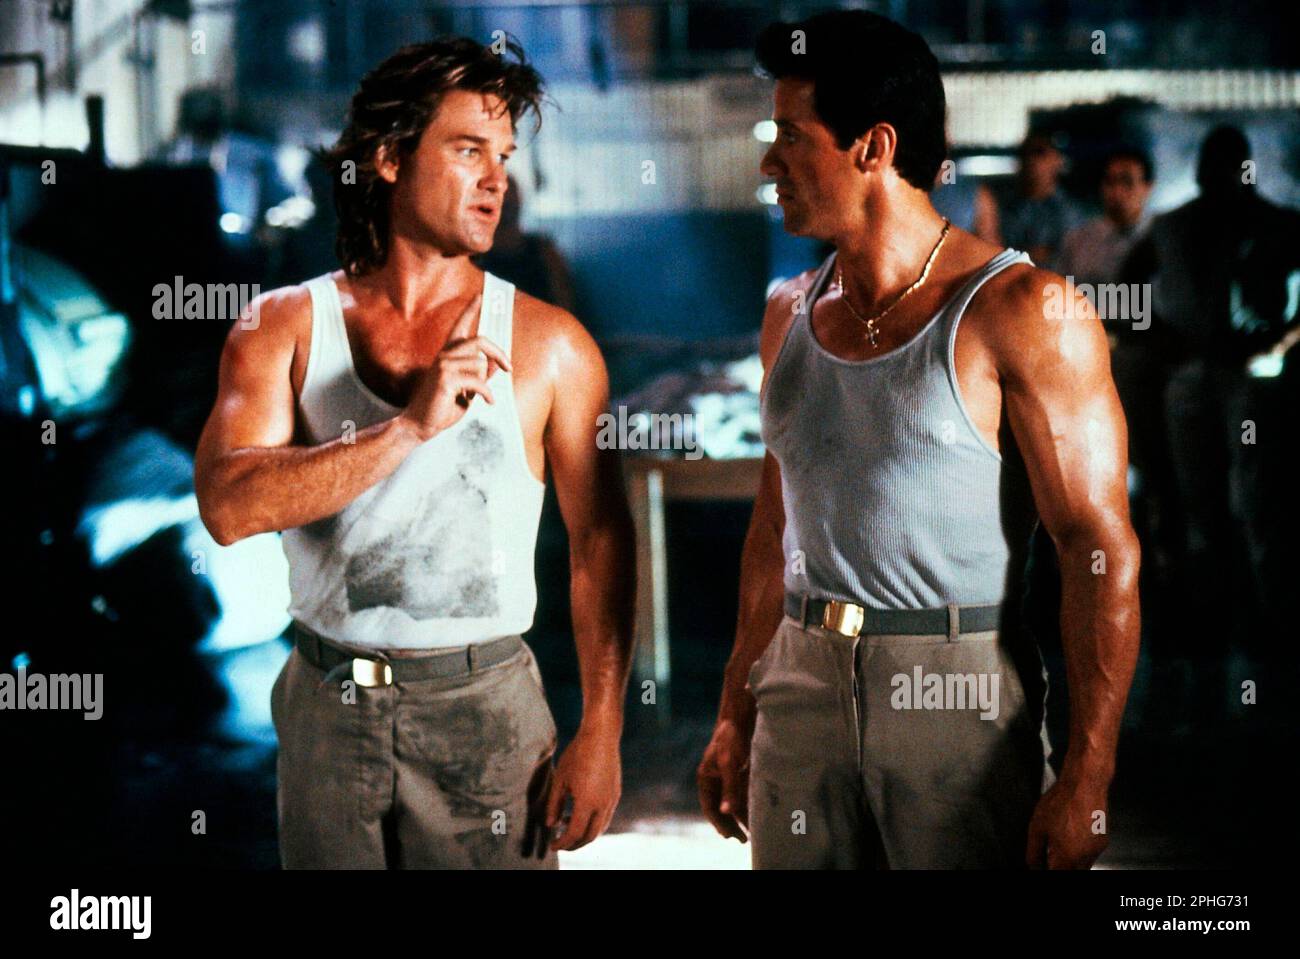 KURT RUSSELL and SYLVESTER STALLONE in TANGO & CASH (1989), directed by ANDREI KONCHALOVSKY and ALBERT MAGNOLI. Credit: WARNER BROTHERS / Album Stock Photo